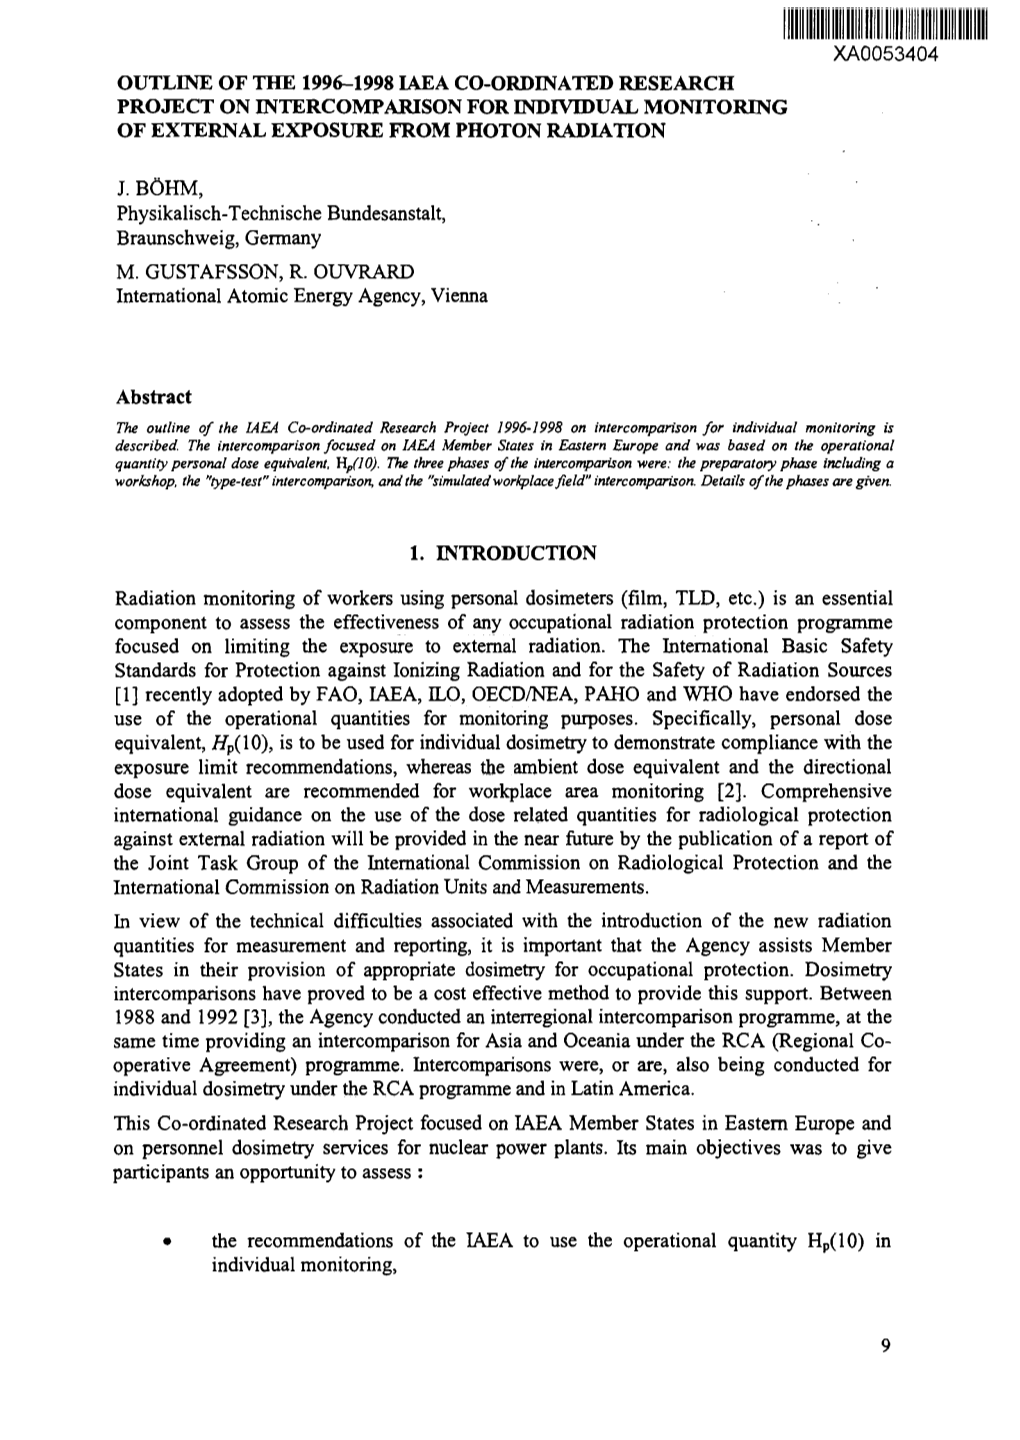 Outline of the 1996-1998 Iaea Co-Ordinated Research Project on Intercomparison for Individual Monitoring of External Exposure from Photon Radiation